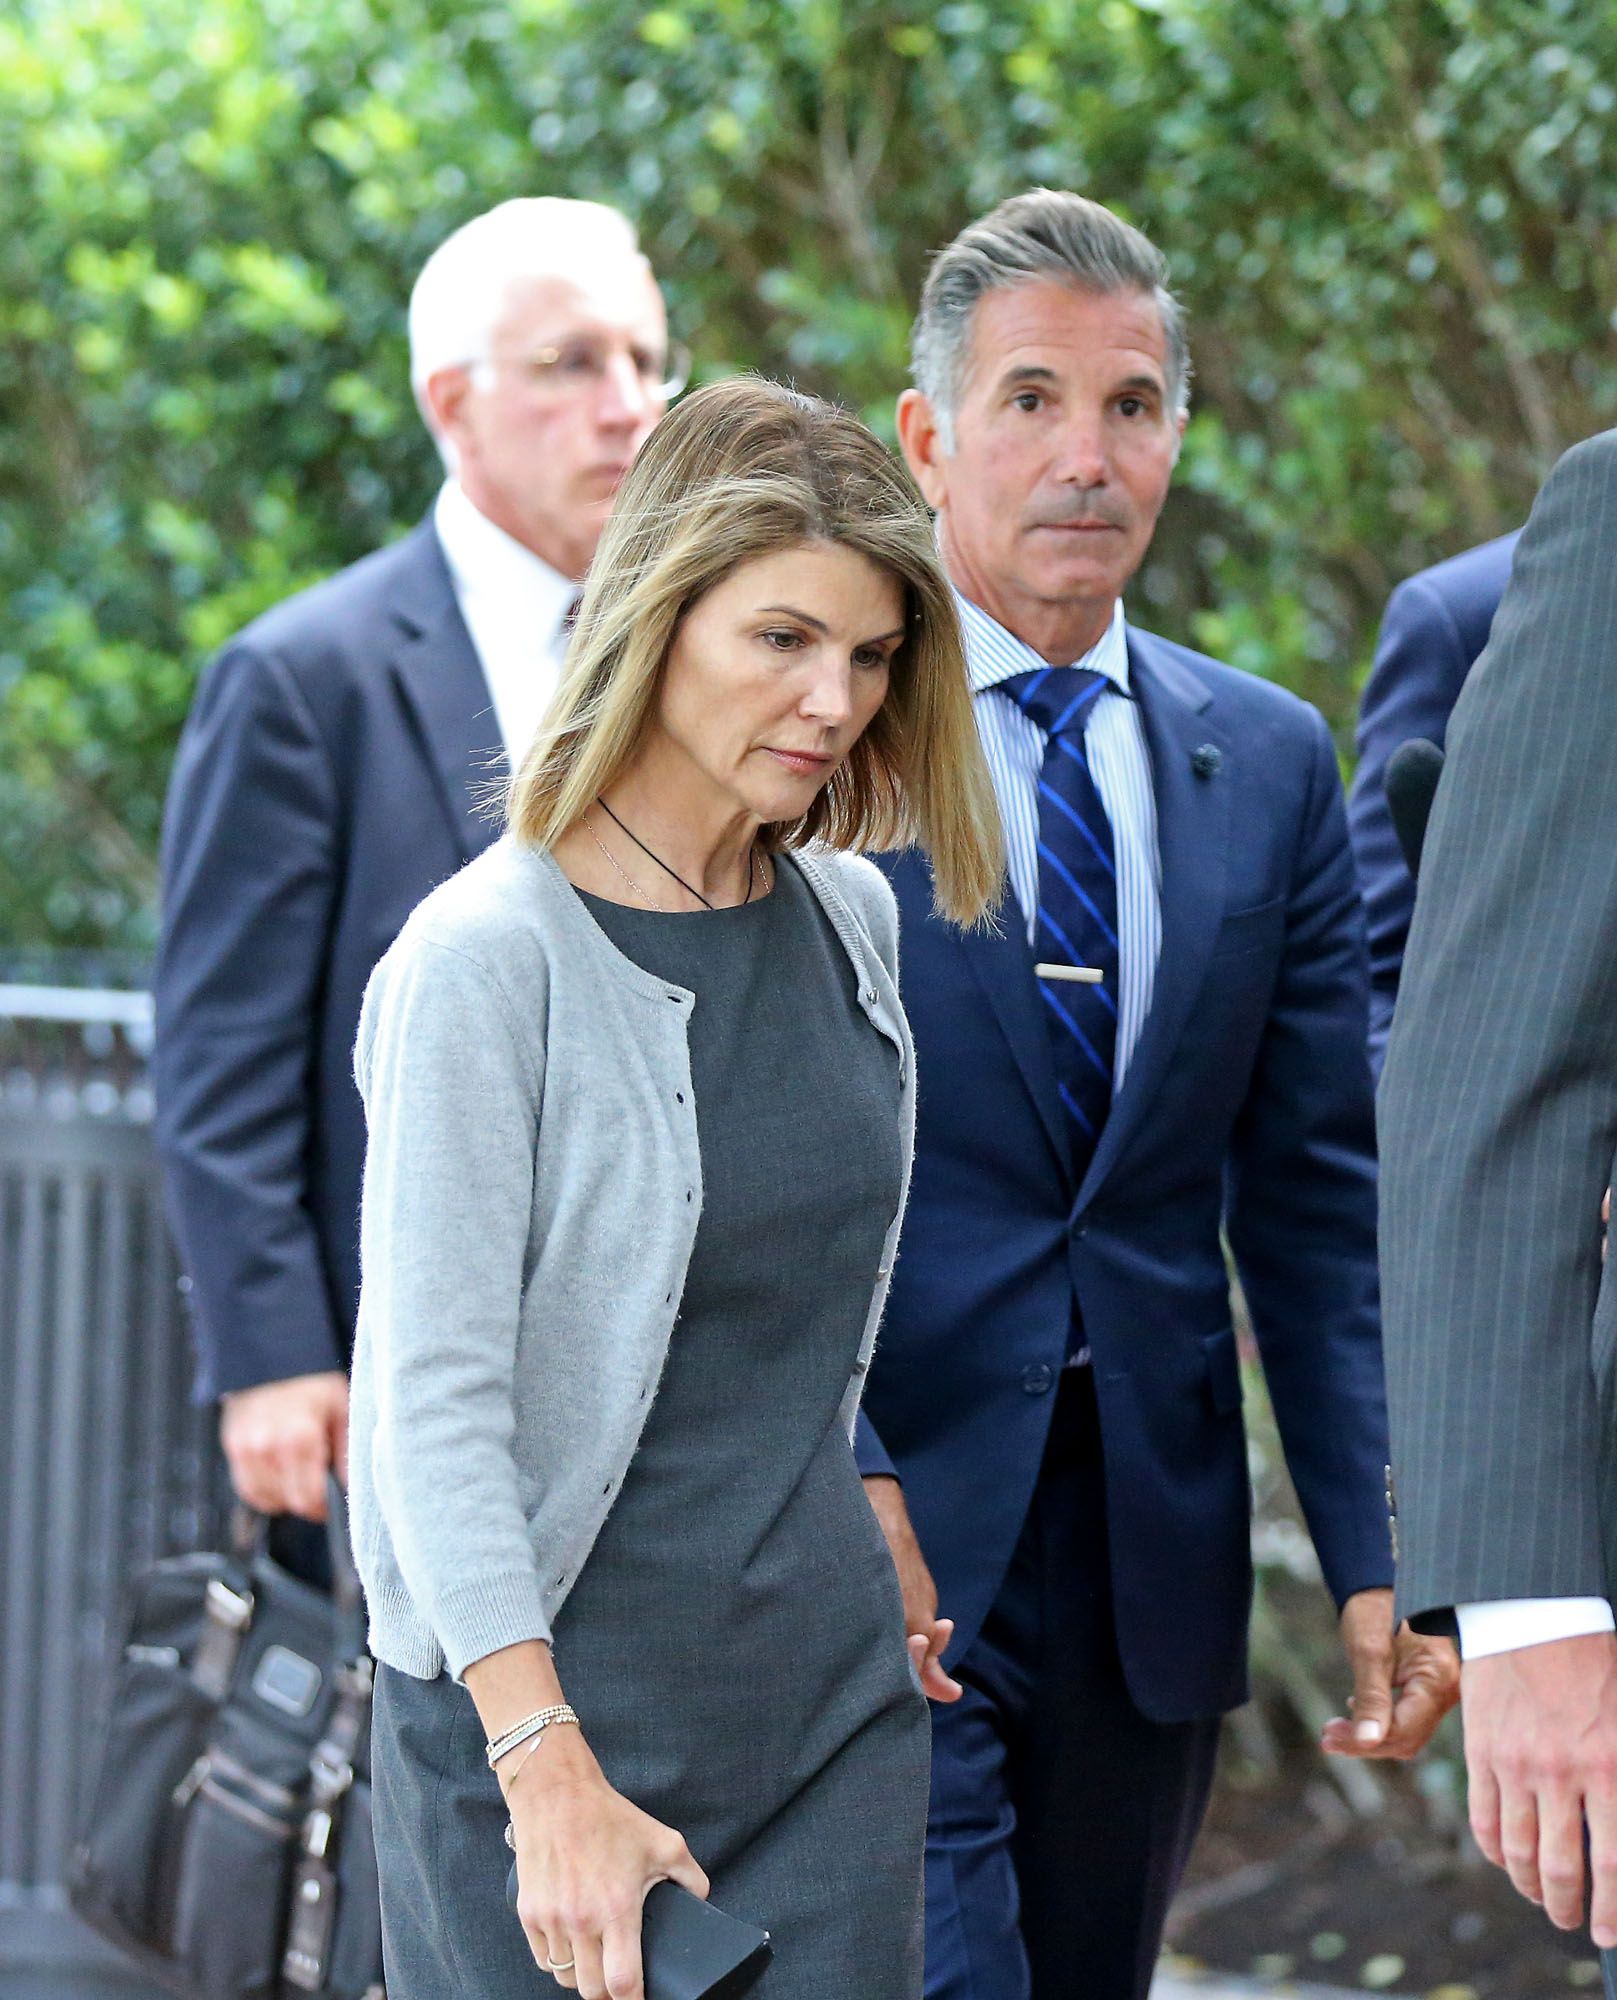 Lori Loughlin and Mossimo Giannulli left Moakley Federal Courthouse after a brief hearing on August 27, 2019 | Photo: Getty Images